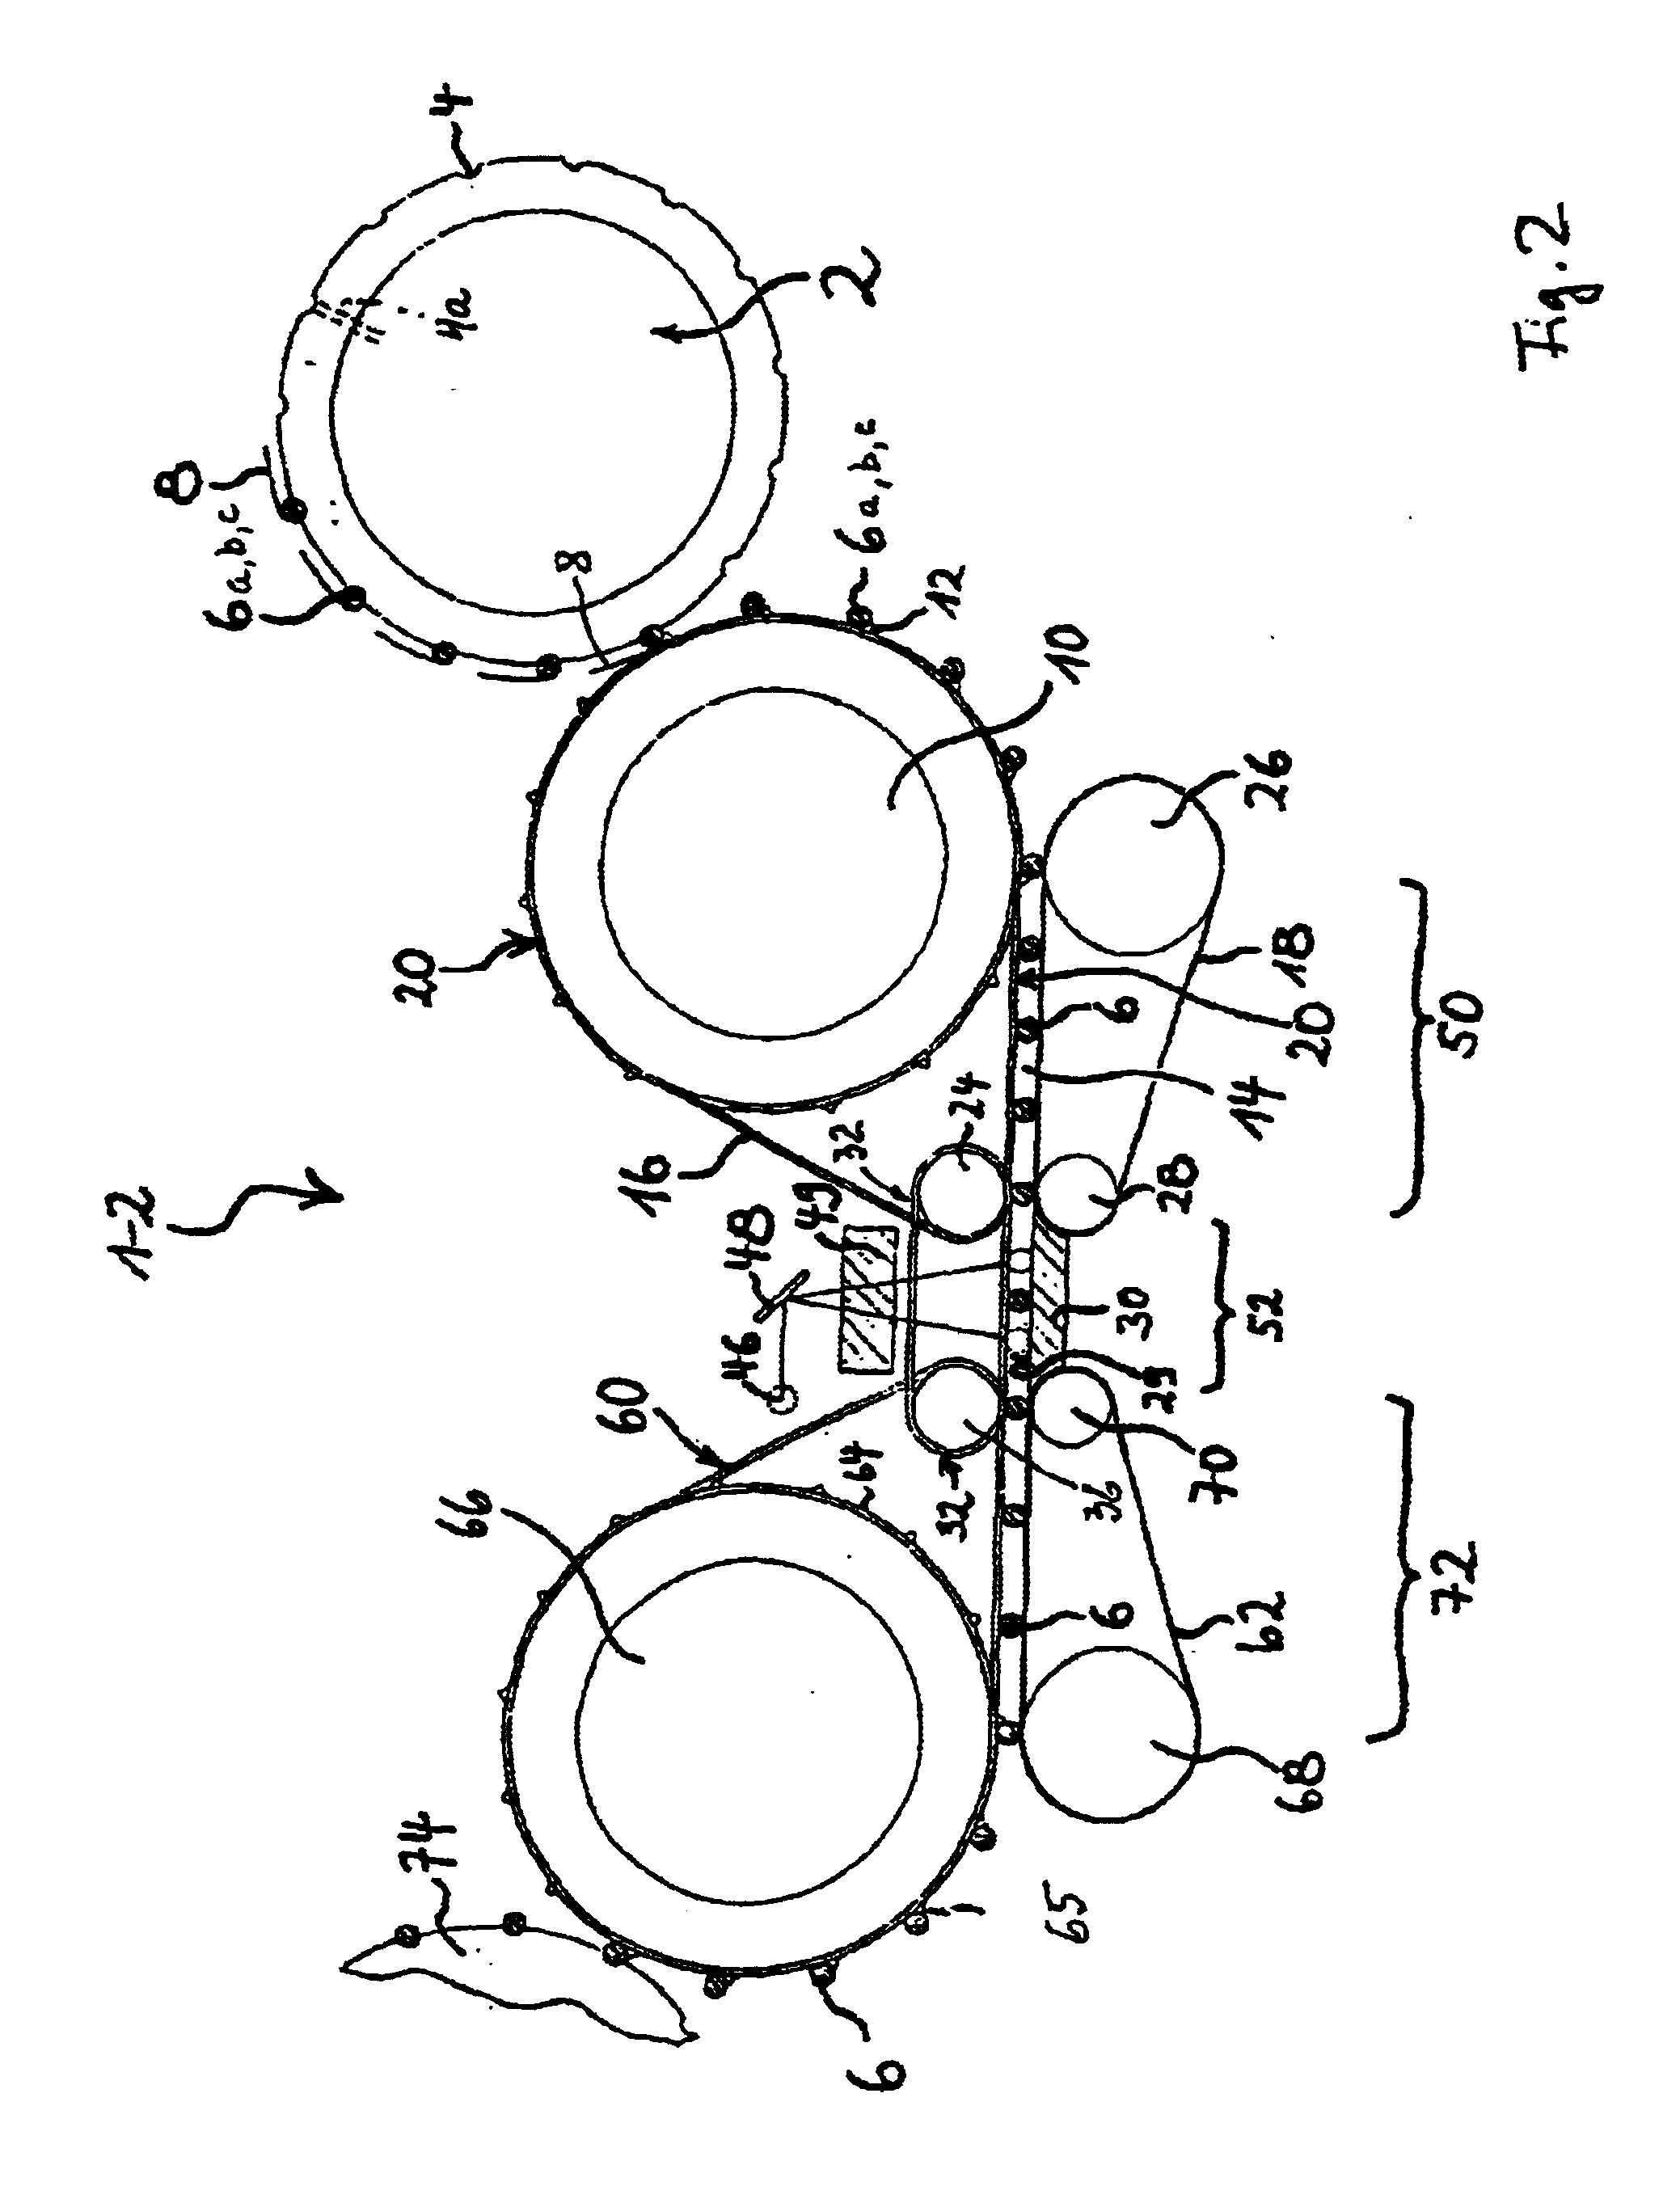 Method of and apparatus for making and processing rod-shaped articles